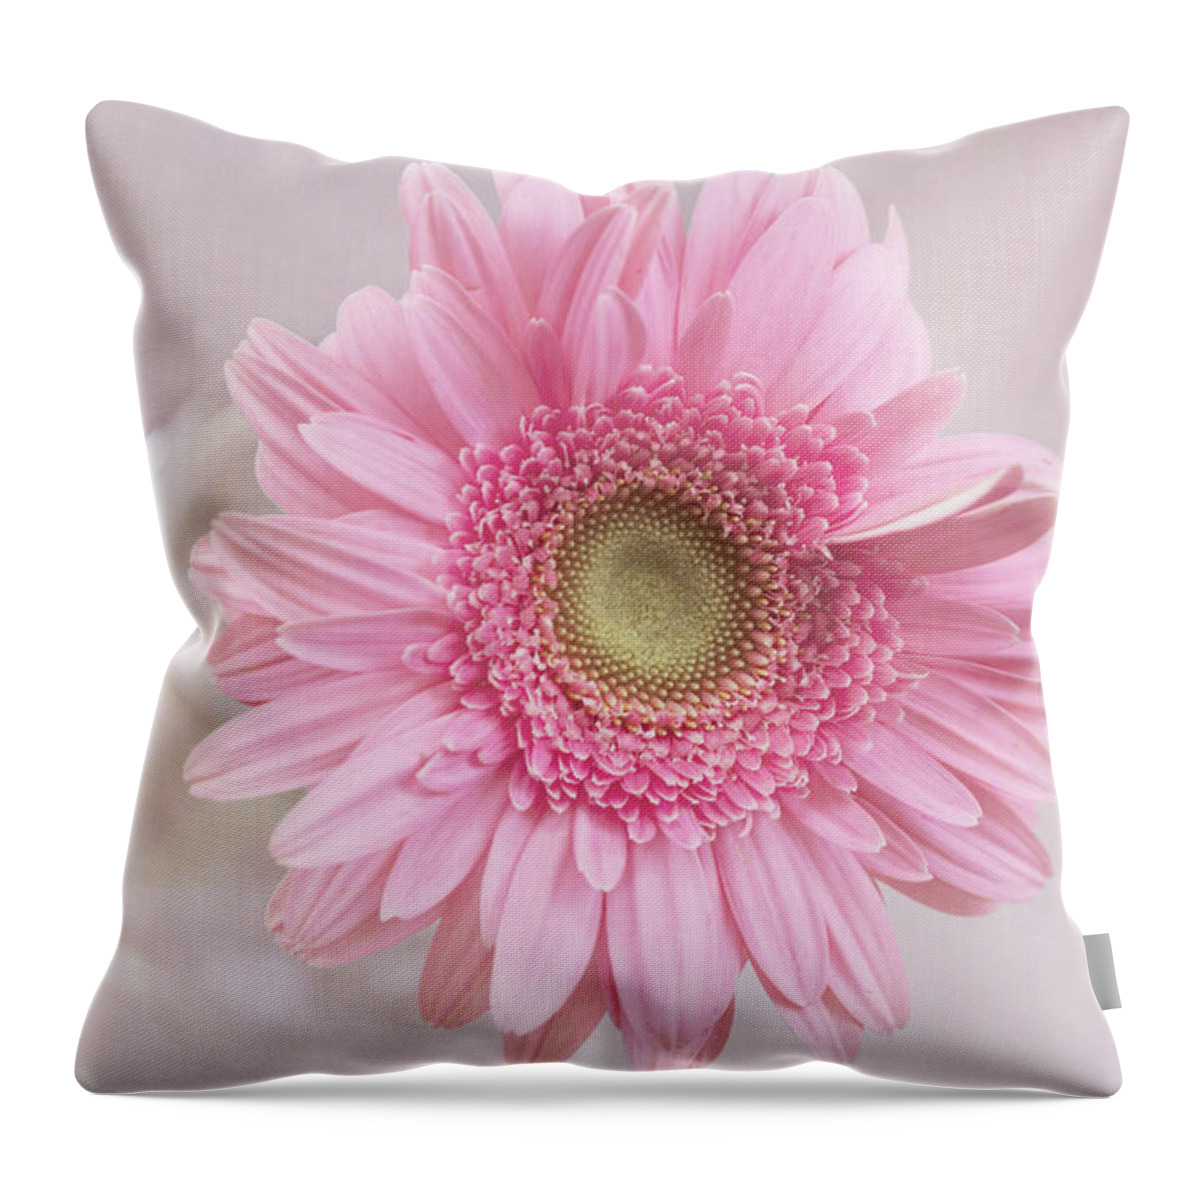 Gerbera Daisy Throw Pillow featuring the photograph Purity of the Heart by Kim Hojnacki